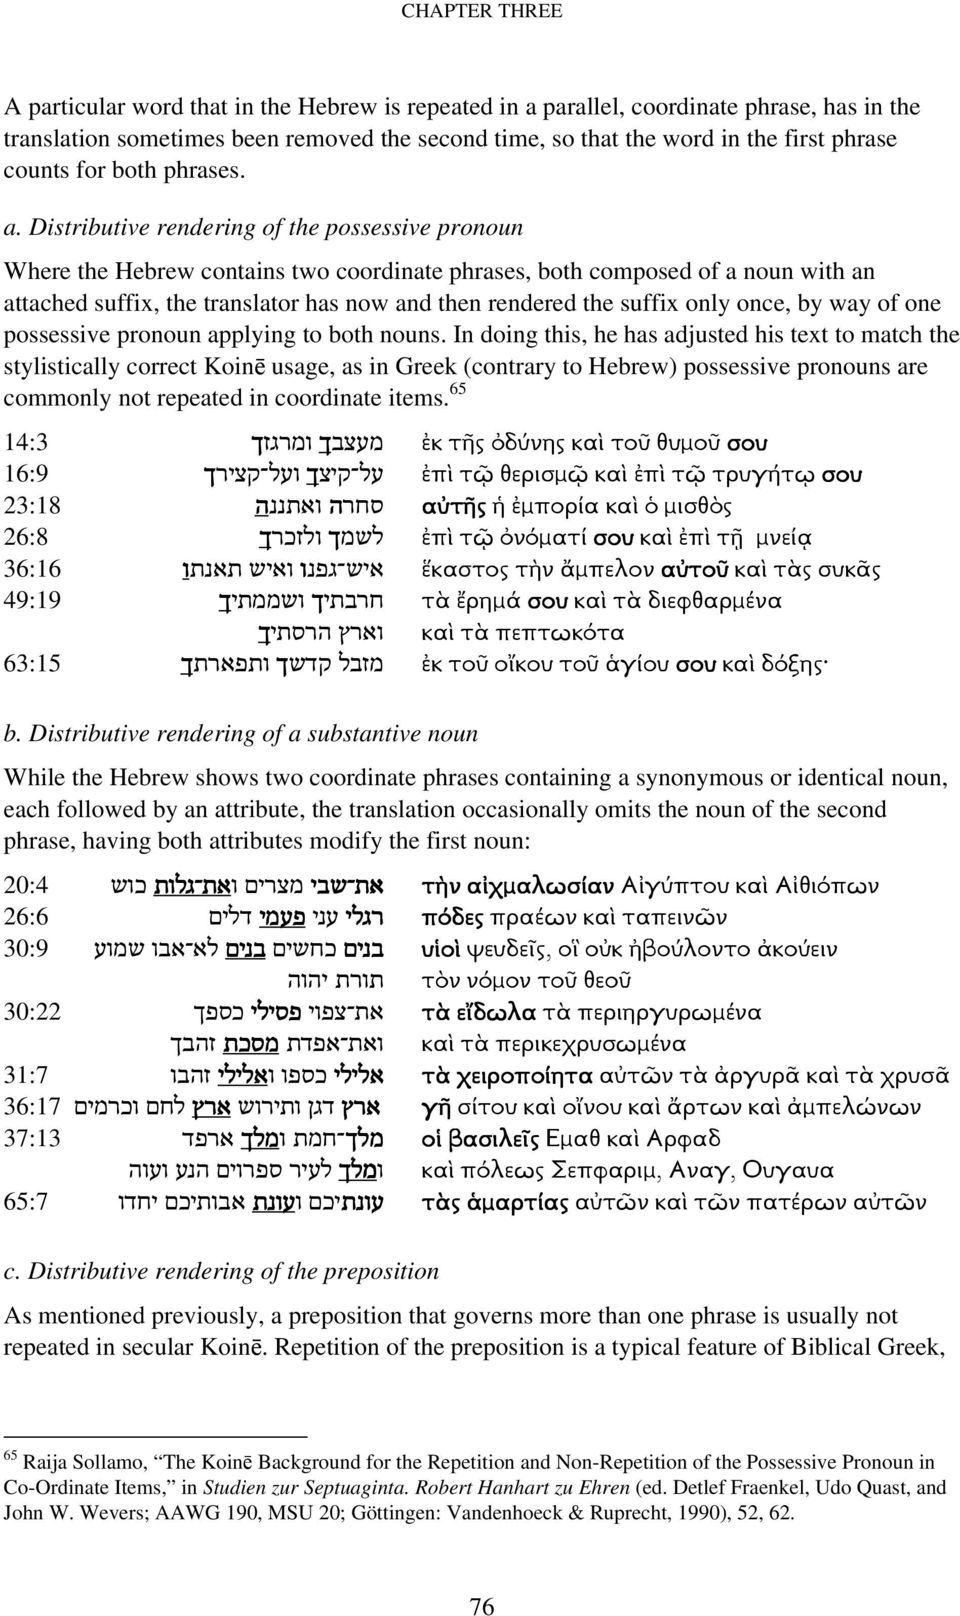 Distributive rendering of the possessive pronoun Where the Hebrew contains two coordinate phrases, both composed of a noun with an attached suffix, the translator has now and then rendered the suffix